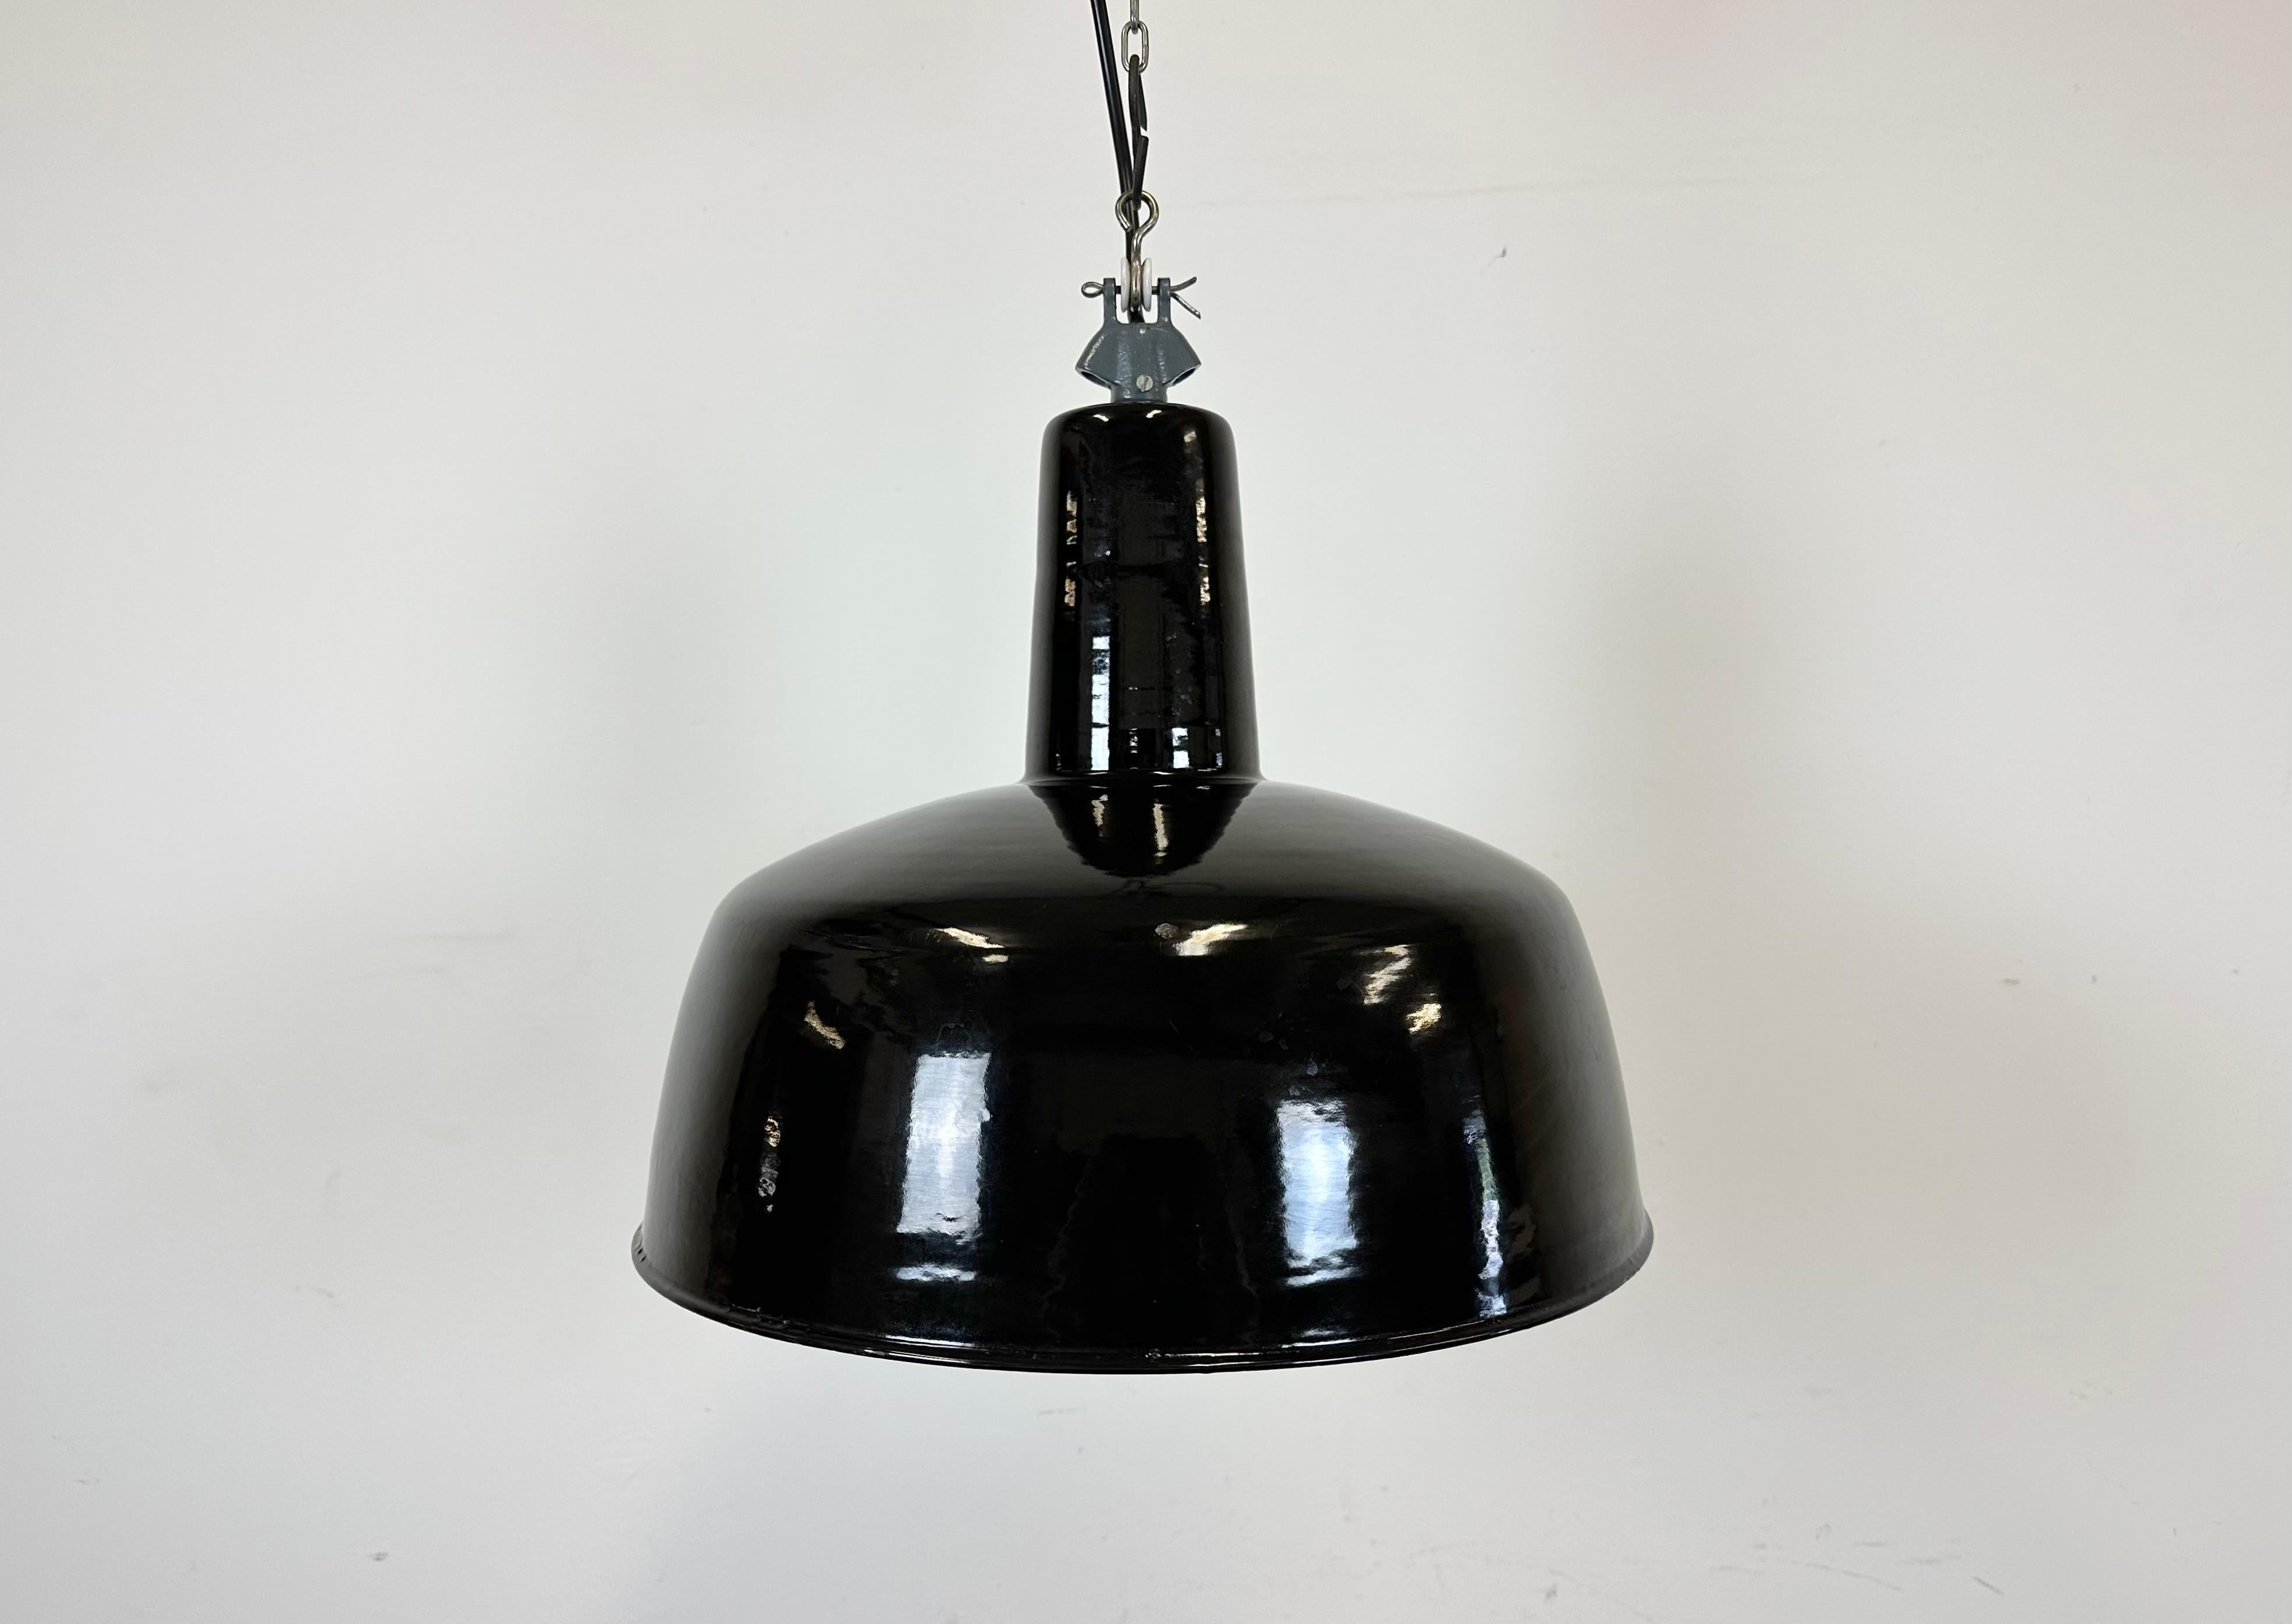 Industrial black enamel factory pendant light made in Italy during the 1960s. White enamel inside the shade. Grey cast iron top. The socket requires standard E 27/ E26 light bulbs. New wire. Fully functional. The weight of the lamp is 2,8 kg.The